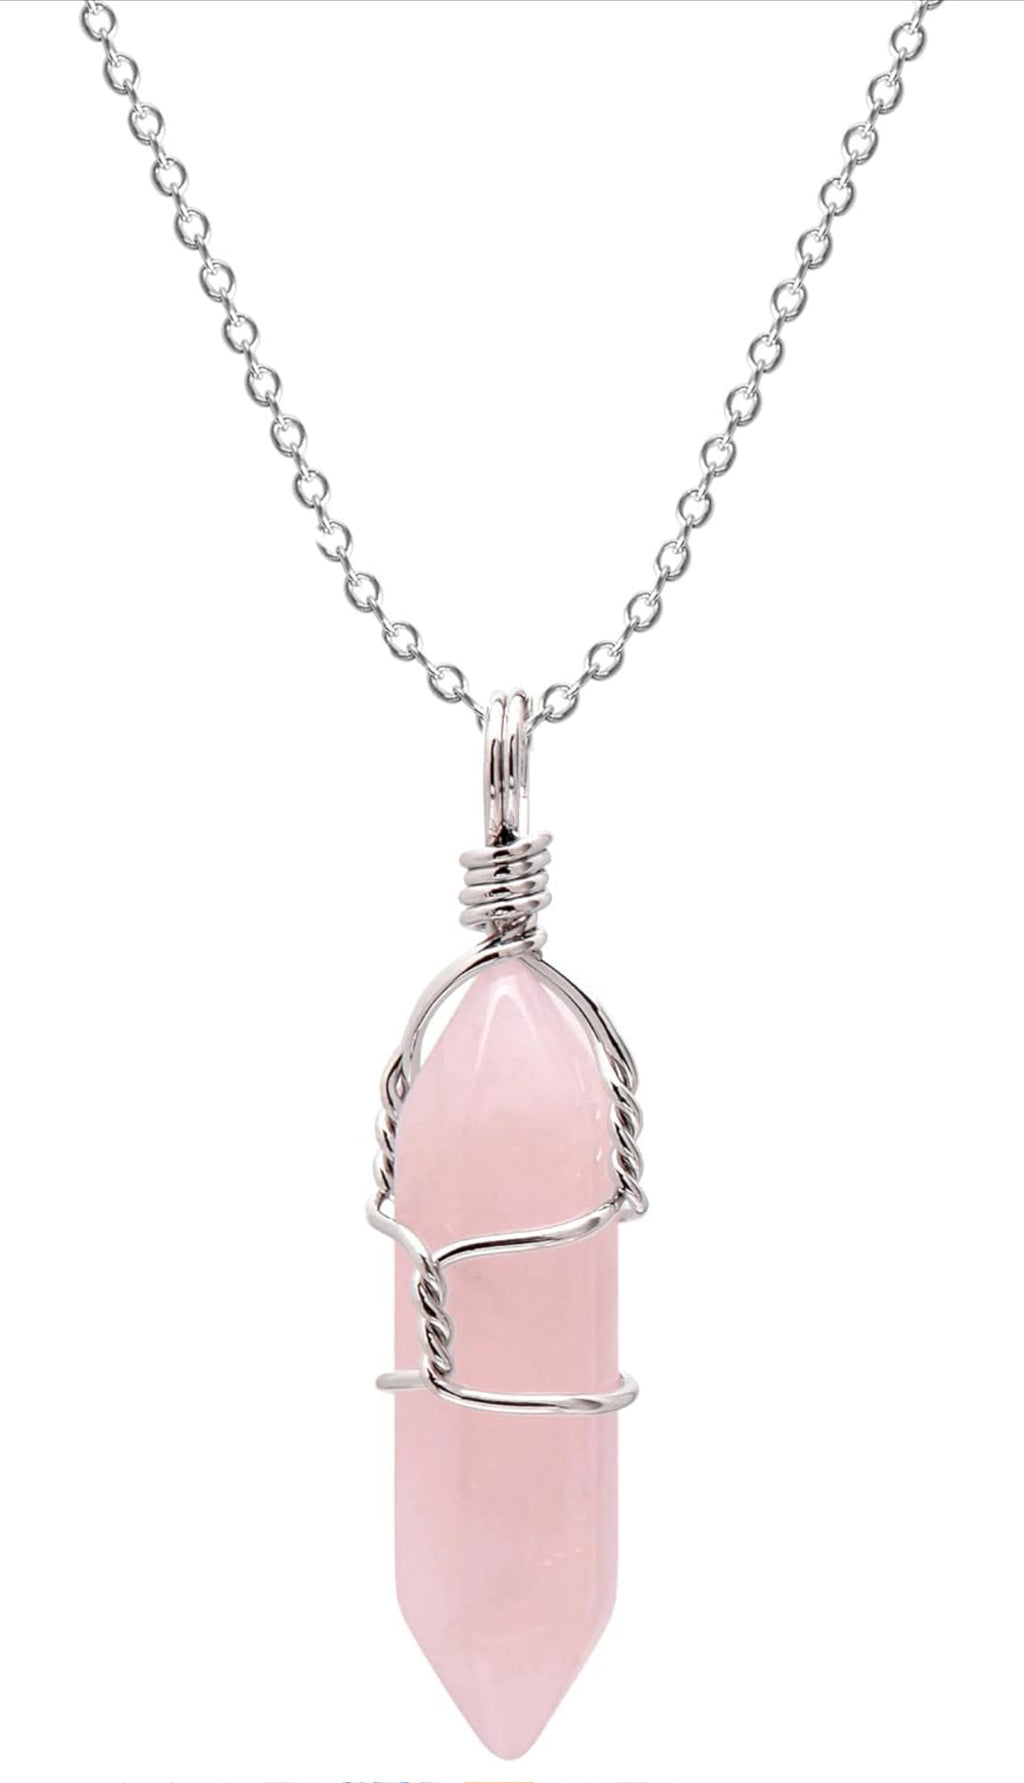 Rose Quartz and Silver-Wrapped Pendant Necklace